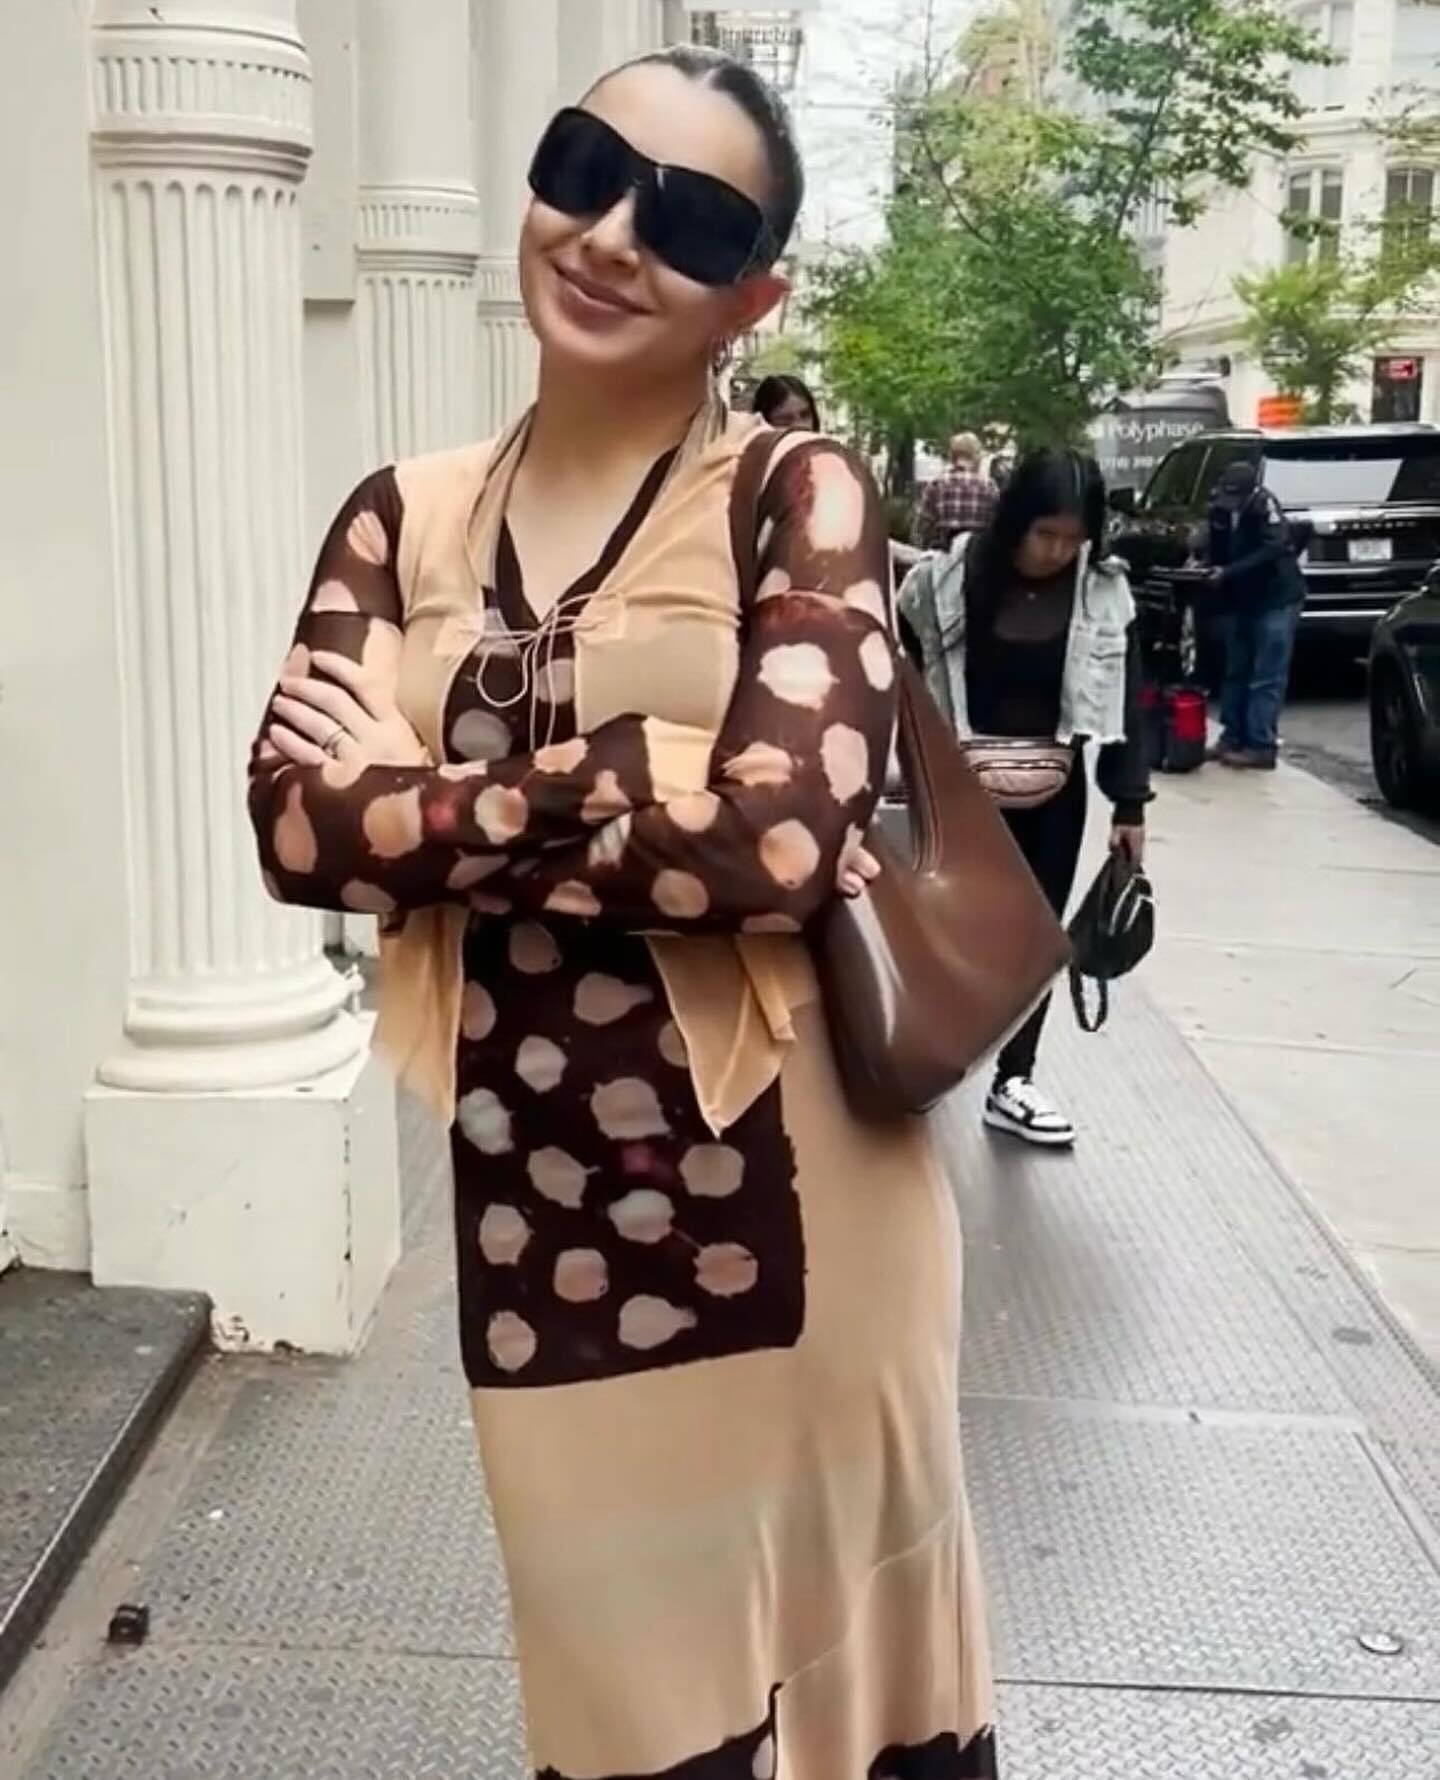 @charli_xcx took to the streets of NYC and chatted with @watchingnewyork in a vintage Spring 2001 Jean Paul Gaultier set from @opulentaddict ! Styled by @chrishoran20 and coordinated by @sanamceline 
.
.
.
.
#charlixcx #jeanpaulgaultier #chrishoran #